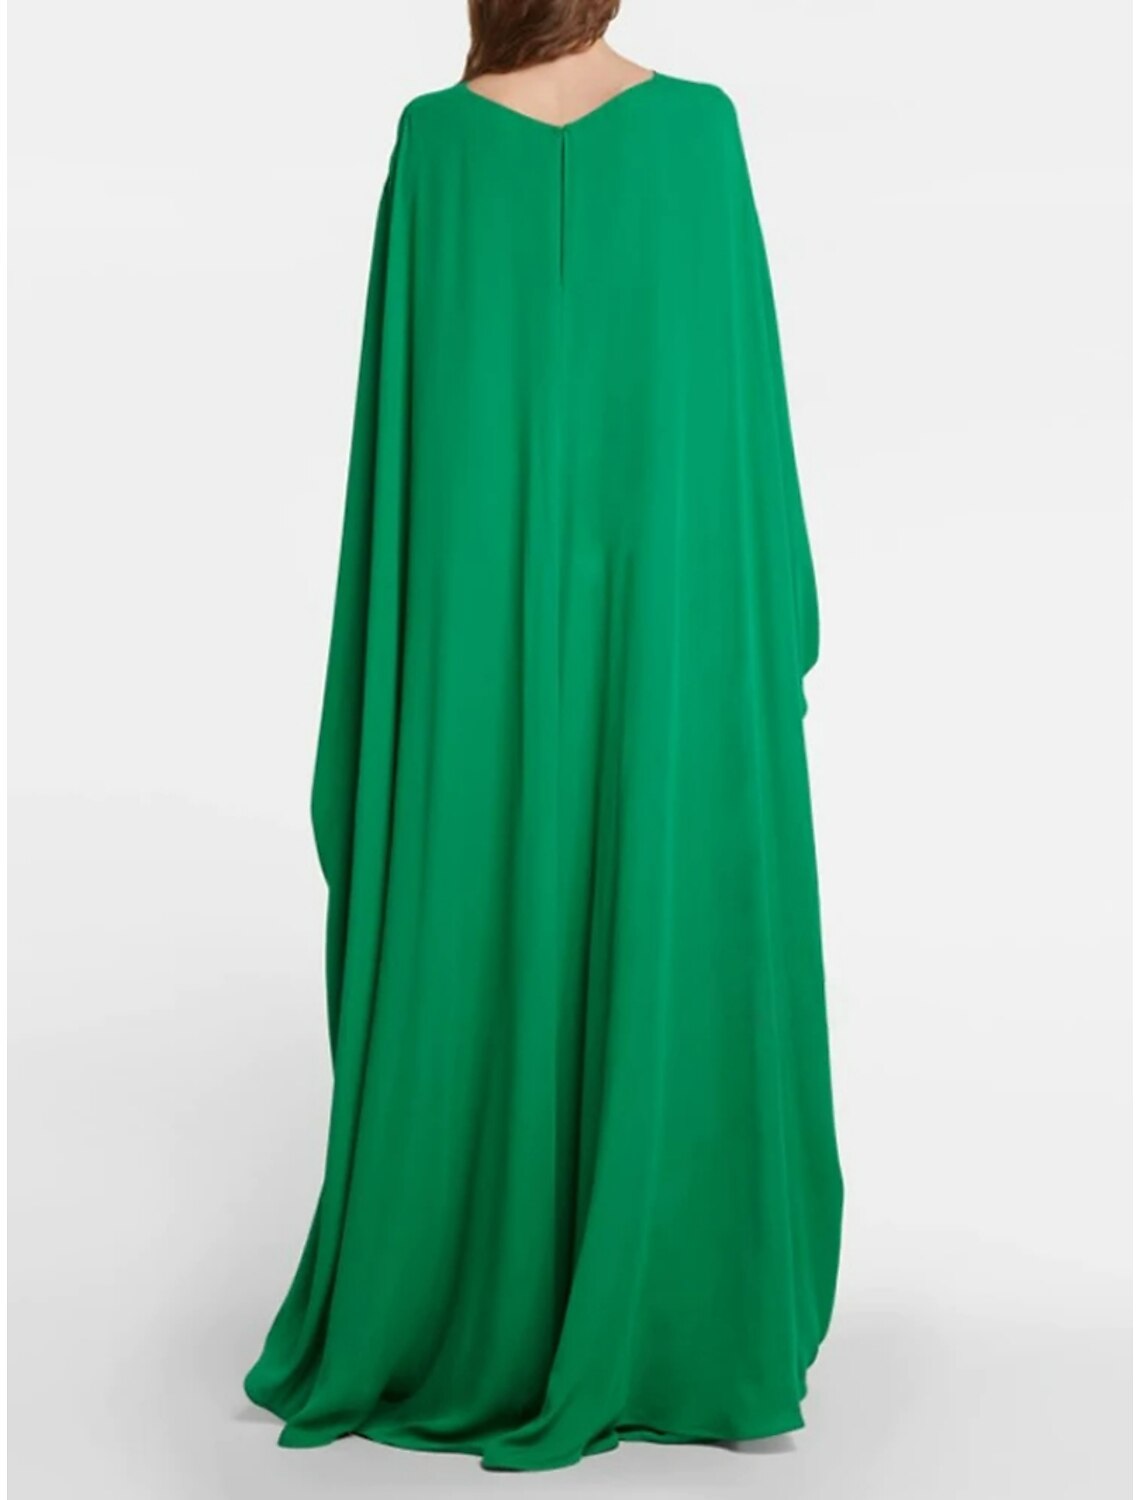 A-Line Evening Gown Elegant Red Green Dress Formal Floor Length Long Sleeve Jewel Neck Chiffon with Pleats